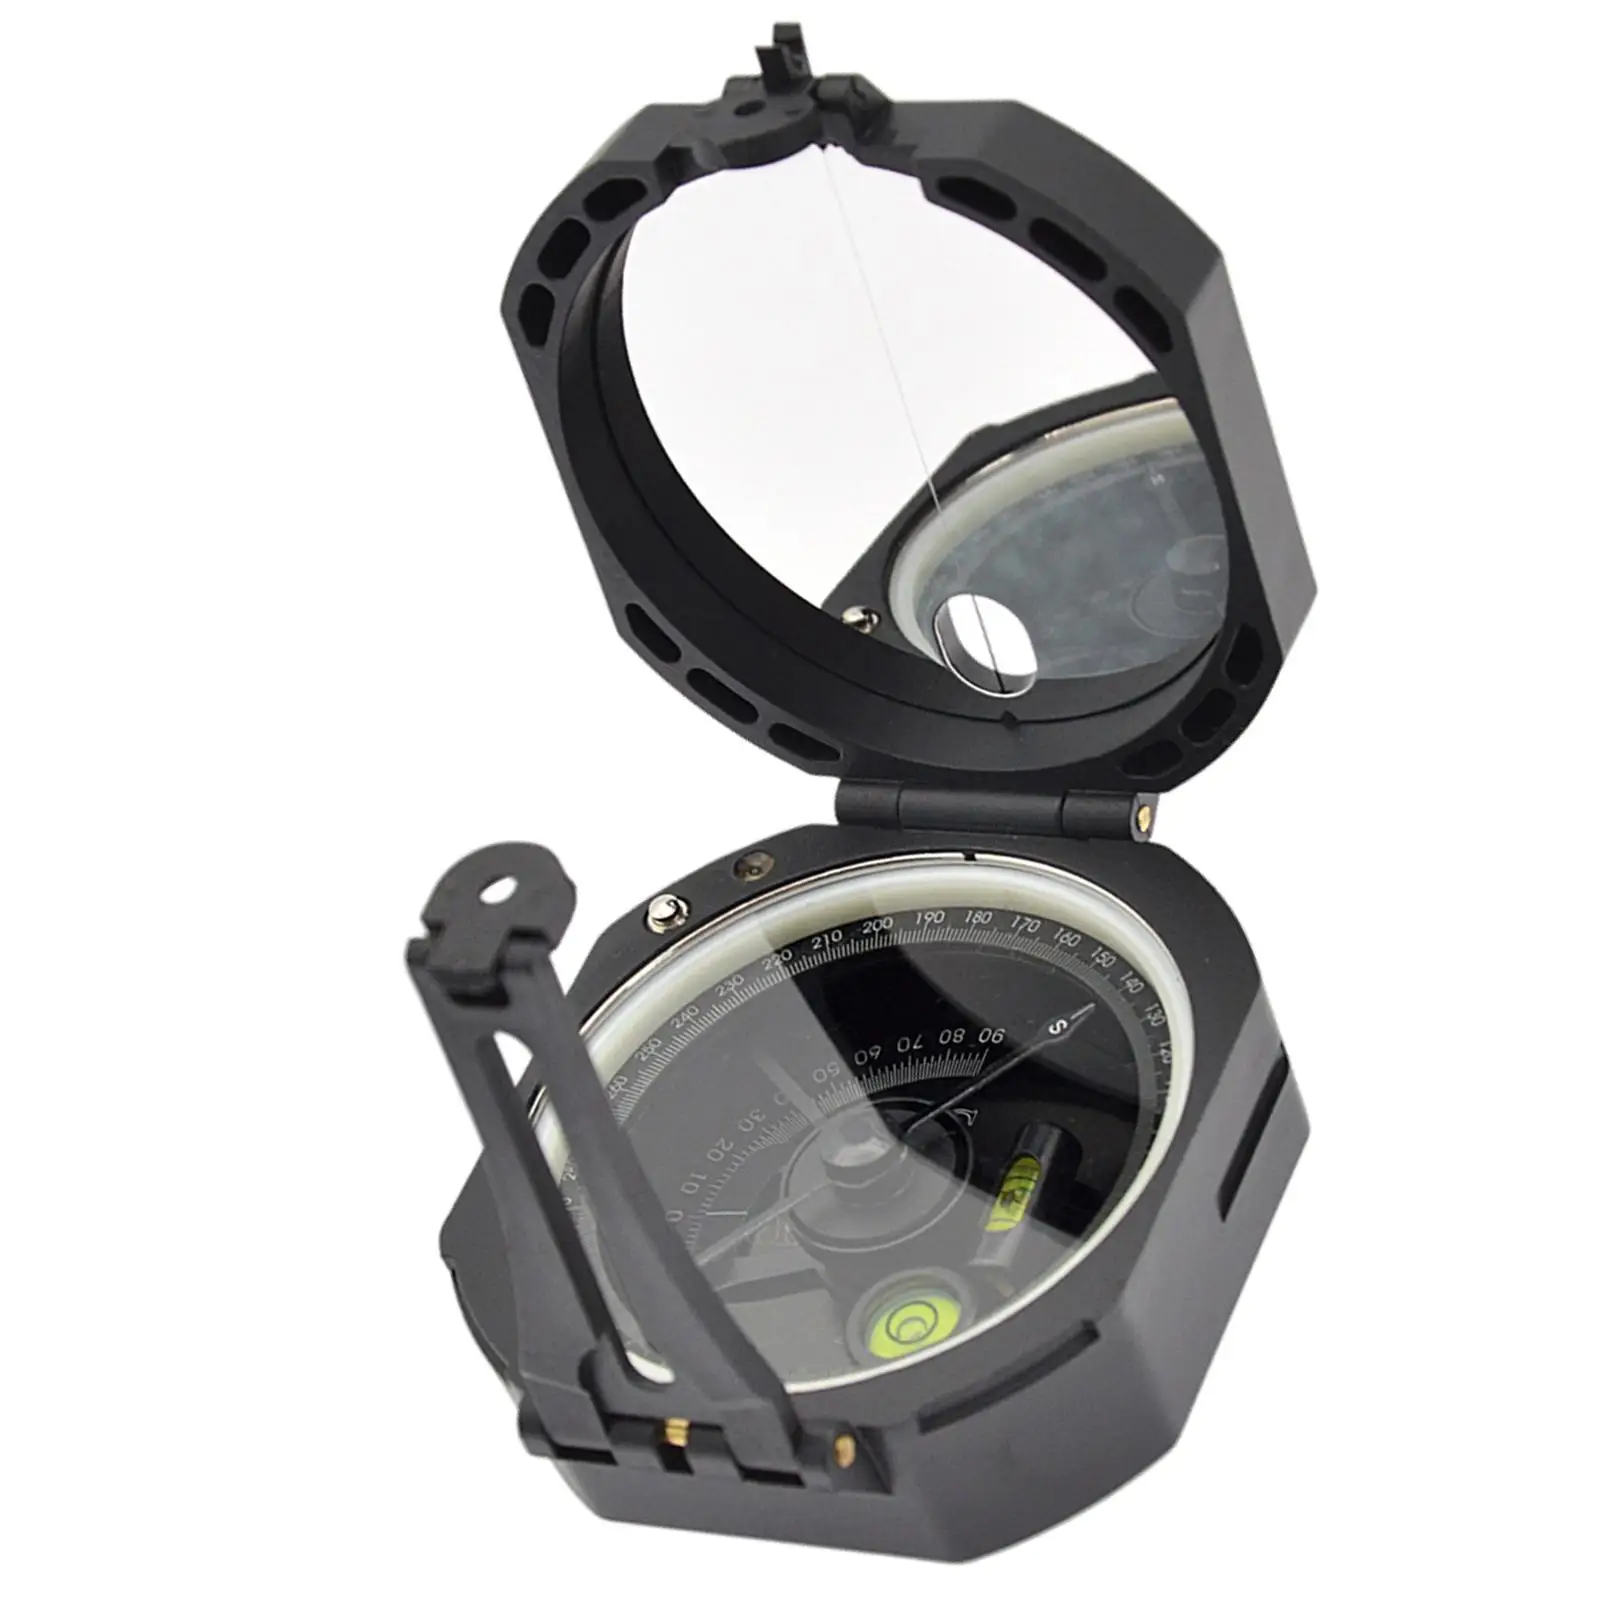 Multifunction Camping Compass Mirror with Pouch Lightweight Pocket for